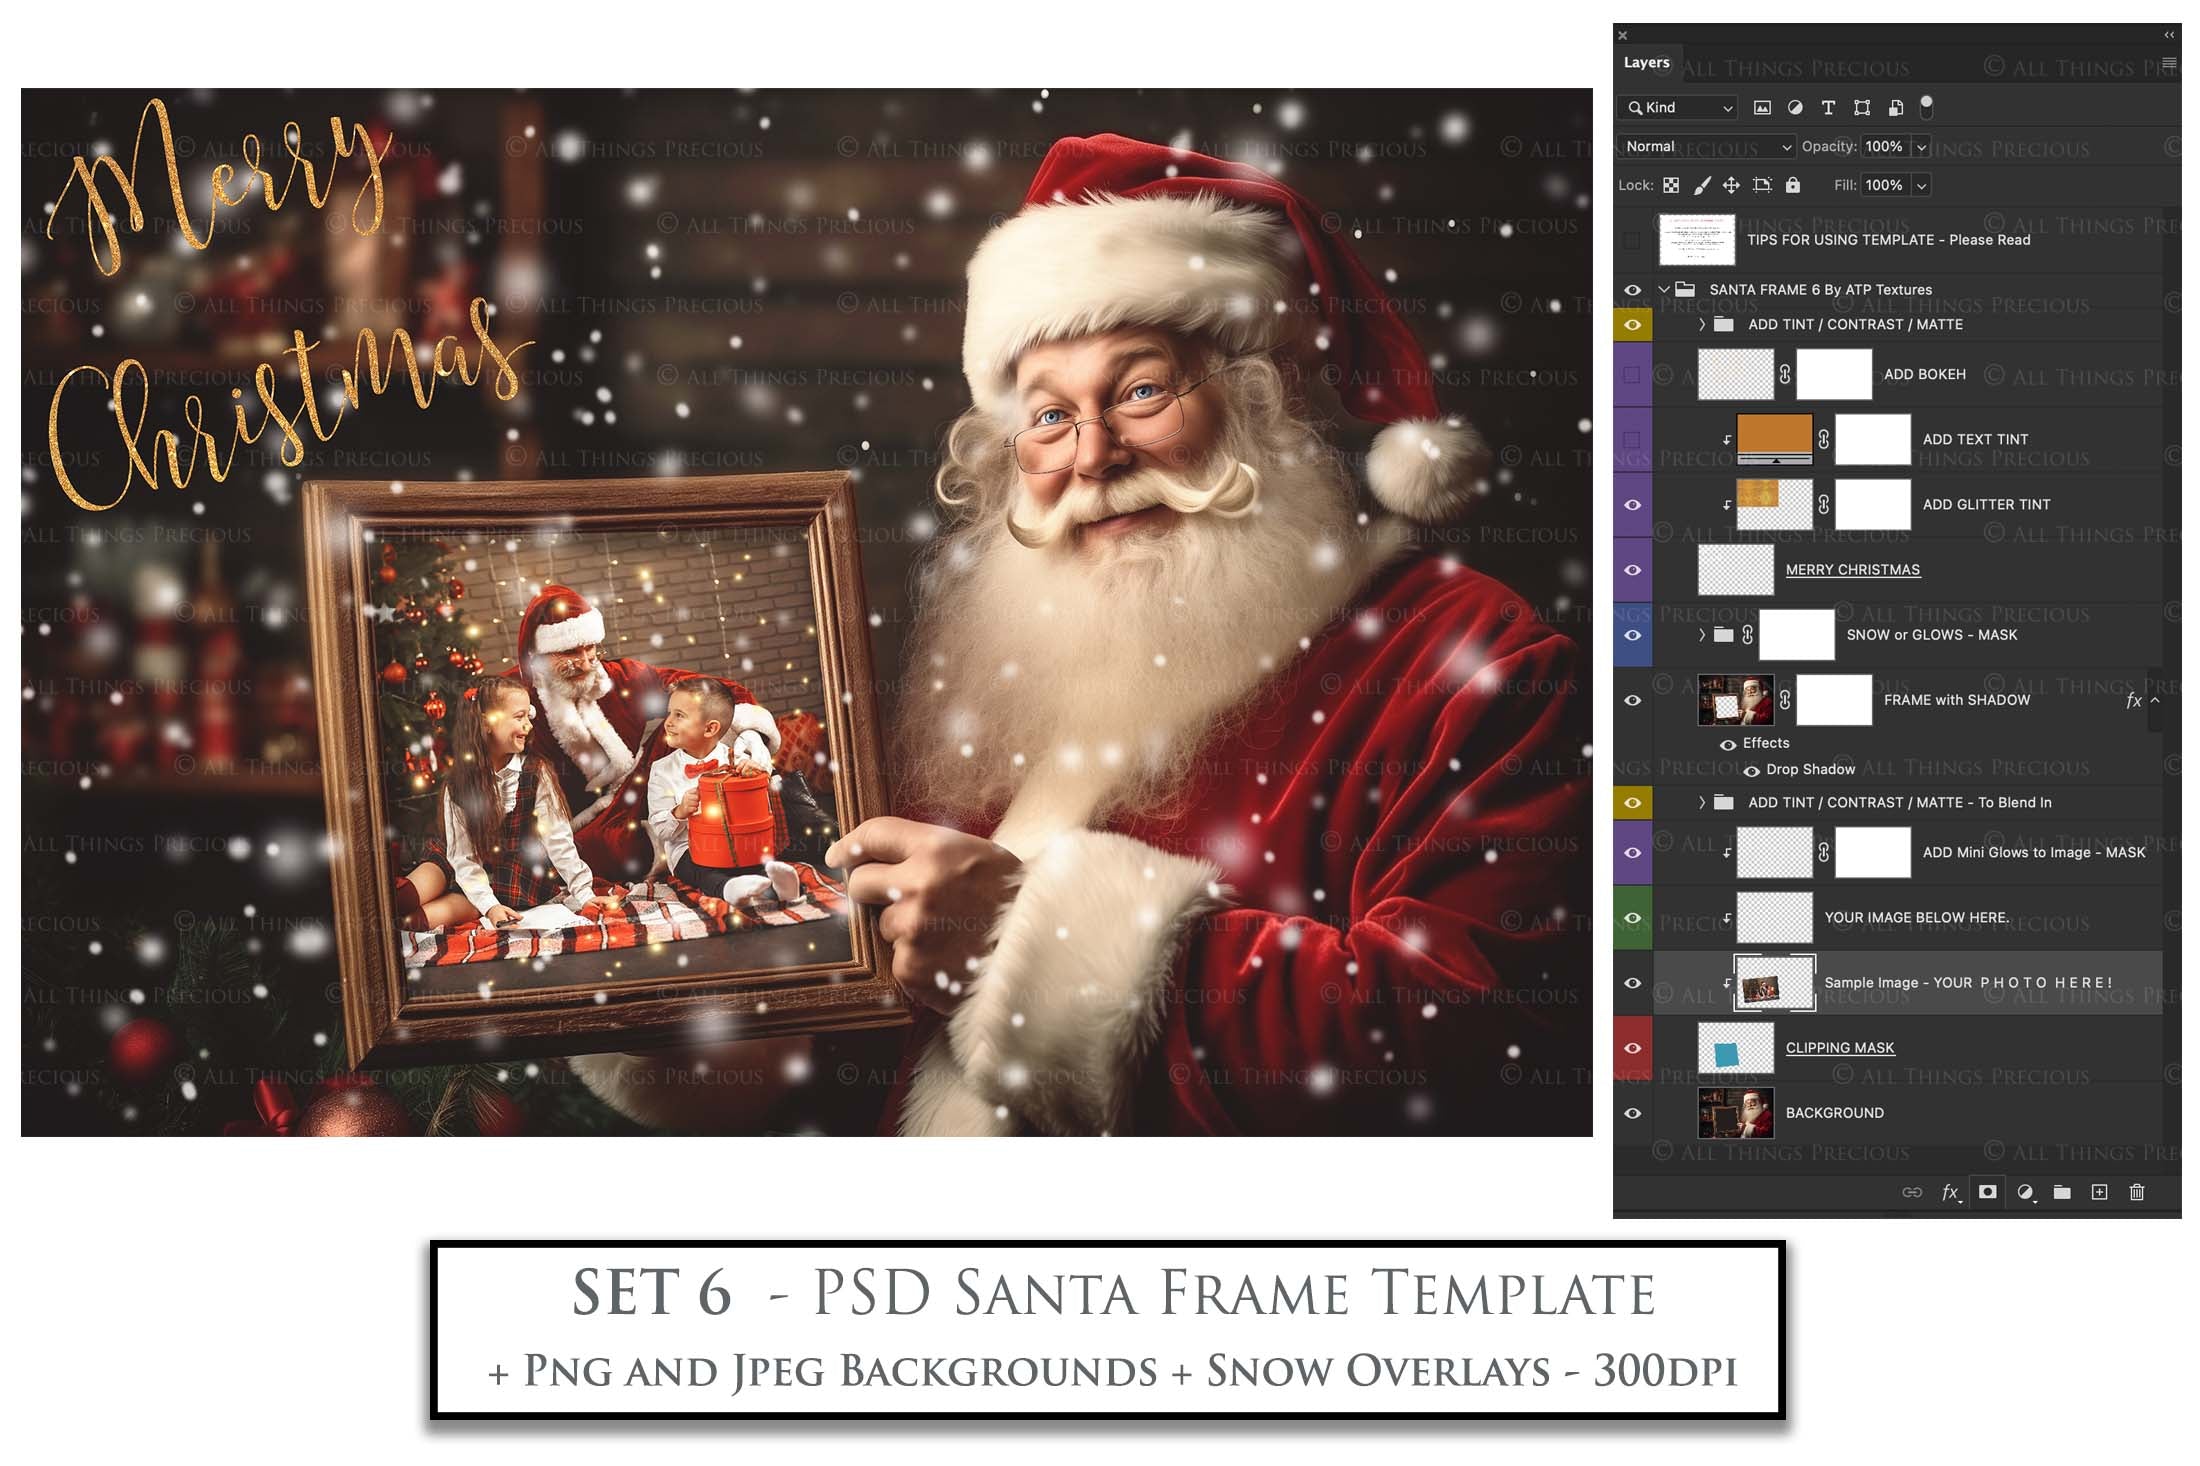 Digital Santa with Frame Background.  Png snow and glow overlays & PSD Template. The frame is transparent, perfect for adding your own images.  The file is 6000 x 4000, 300dpi. Png Included. Use for Christmas edits, Photography, Card Crafts, Scrapbooking. Xmas Backdrops. Santa holding a frame.